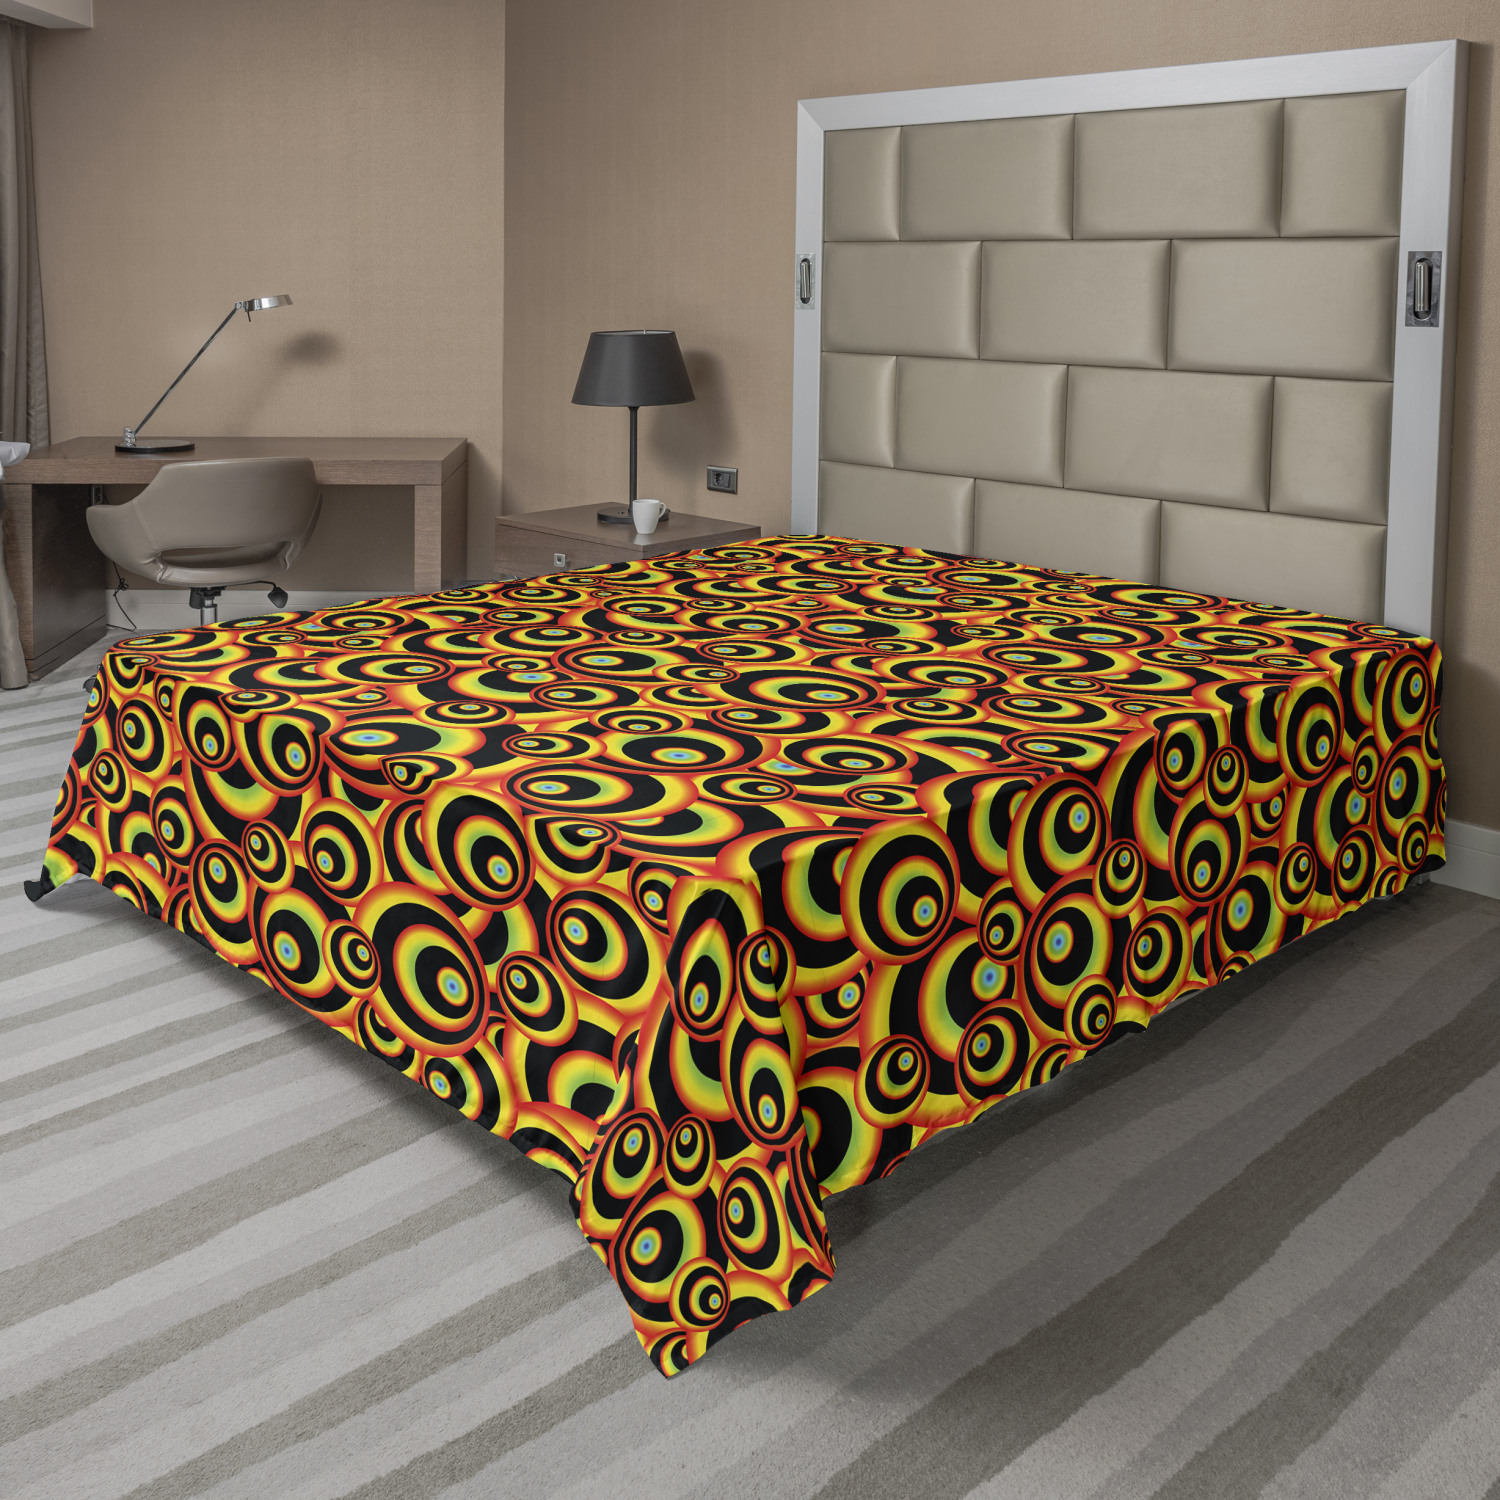 Details about   Ambesonne Abstract Layout Flat Sheet Top Sheet Decorative Bedding 6 Sizes 